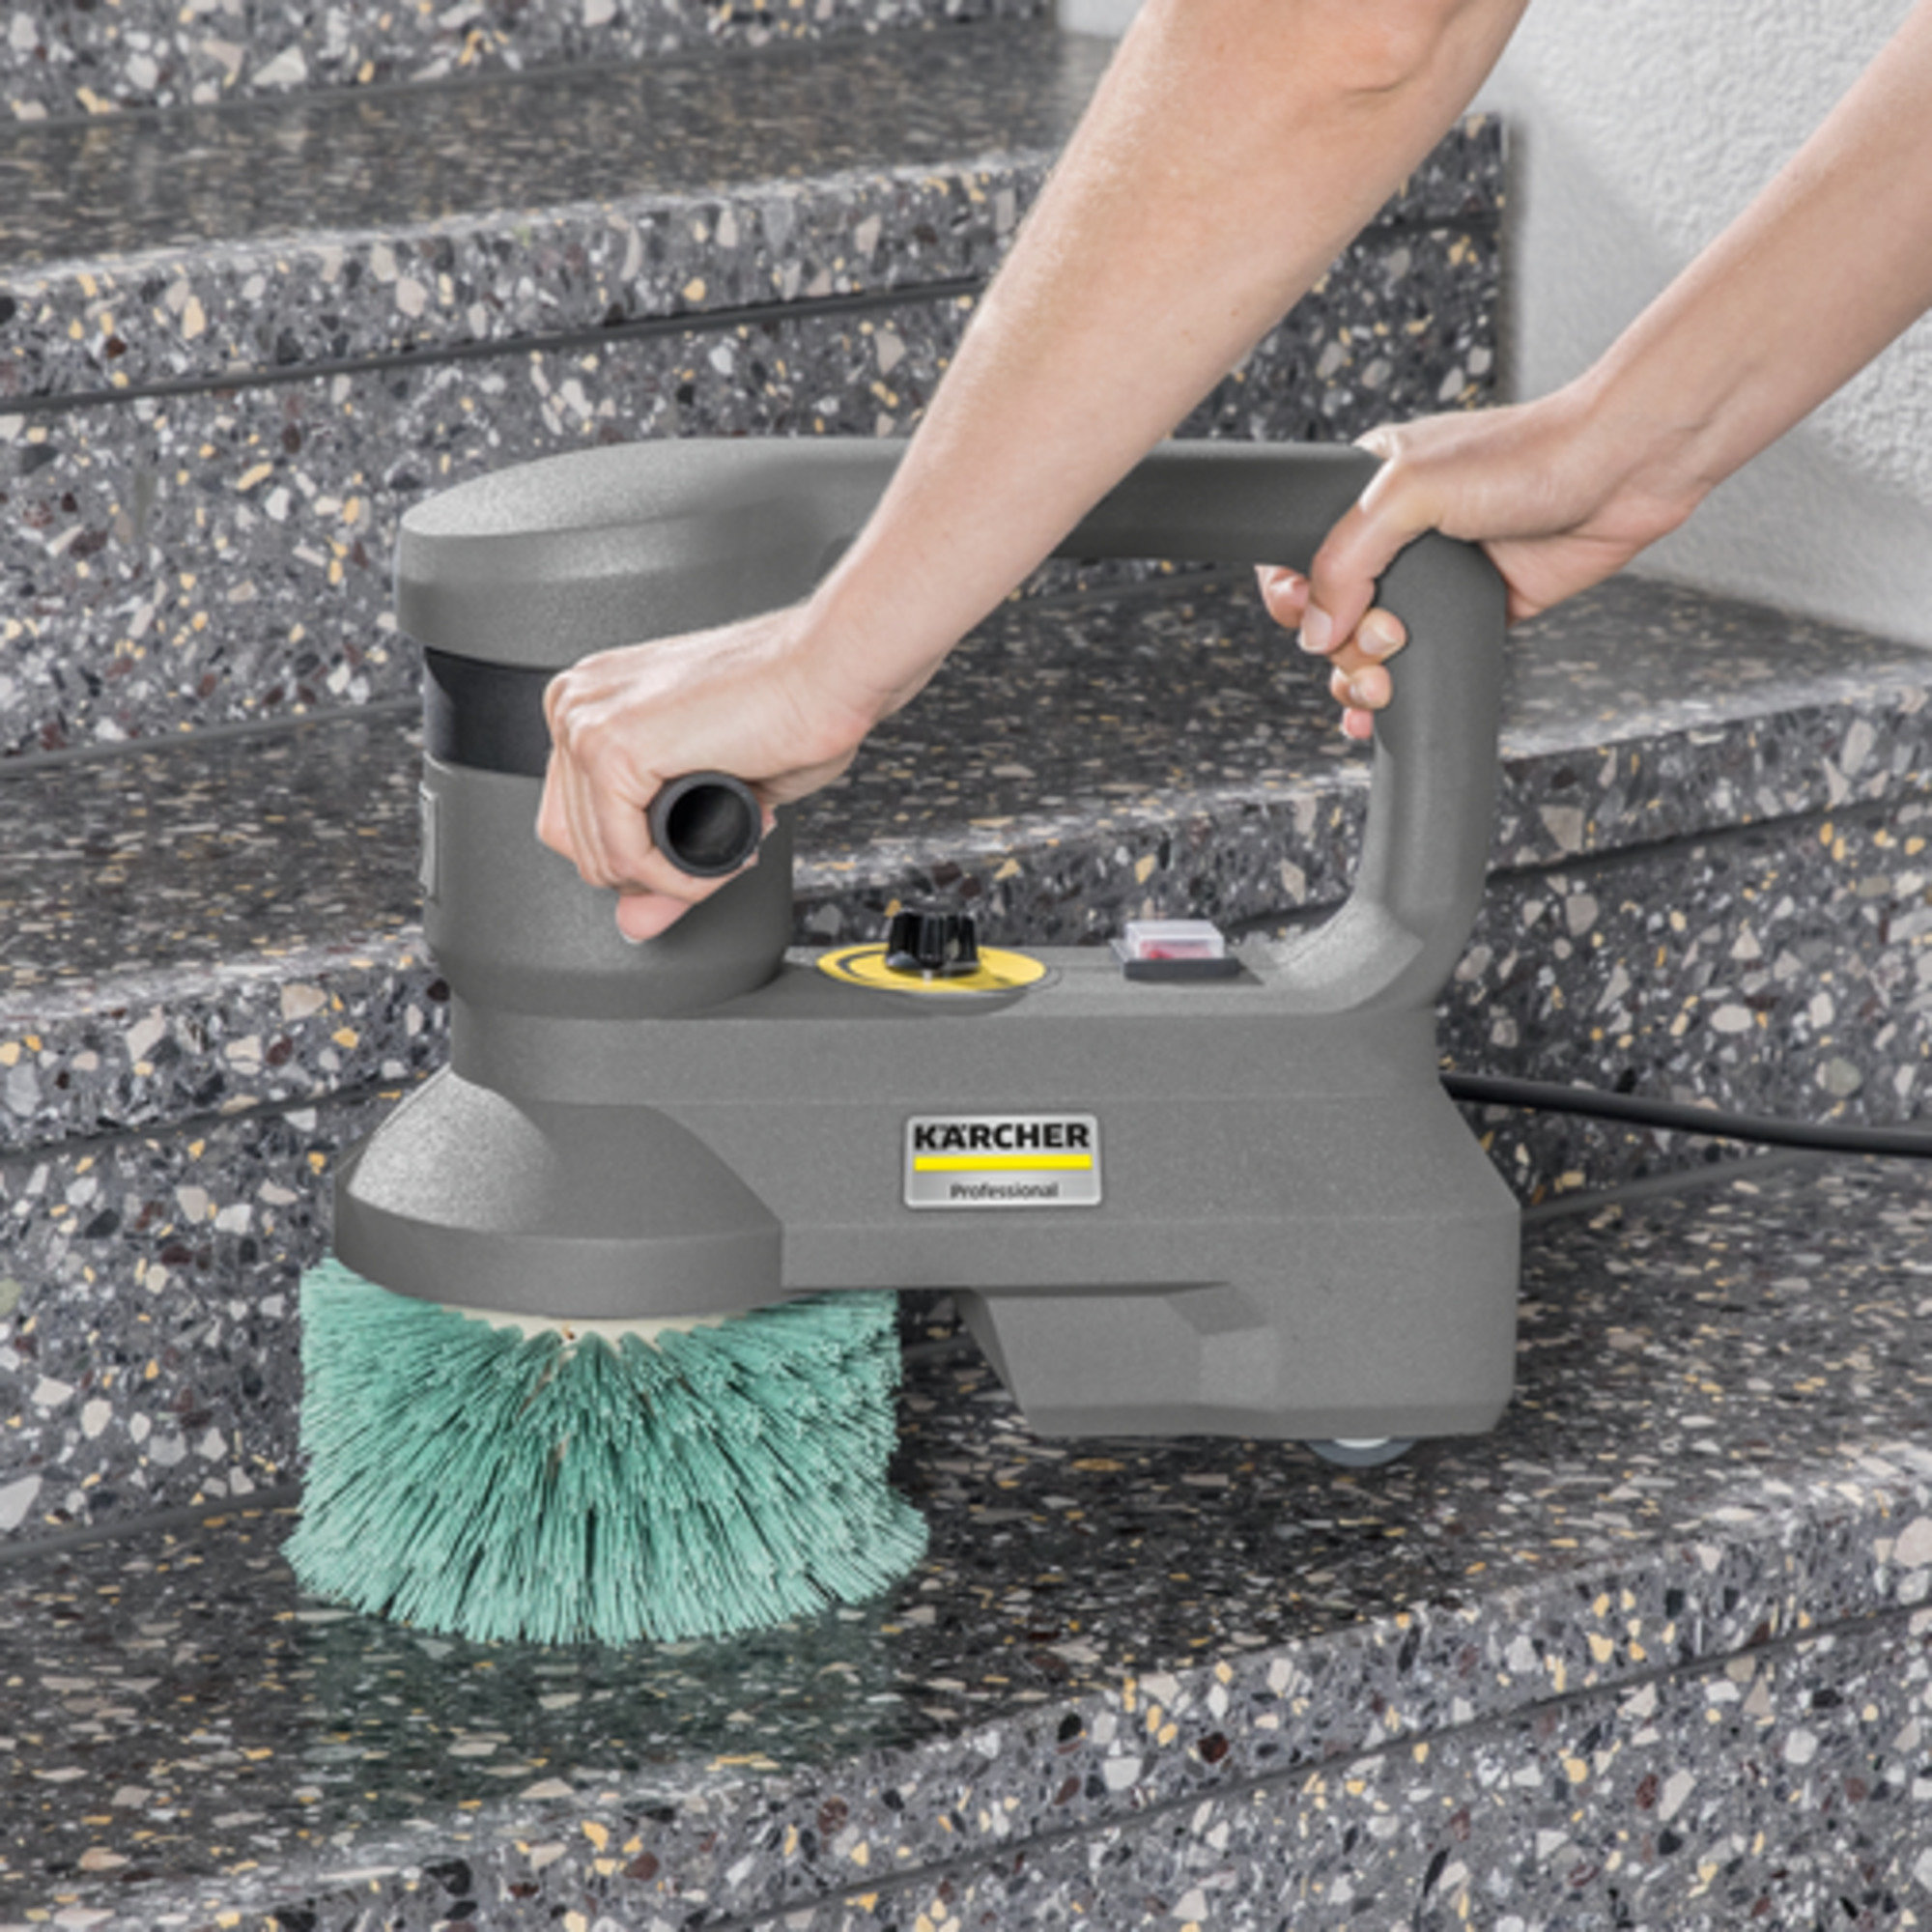 Stair cleaning machine BD 17/5 C: Light and compact